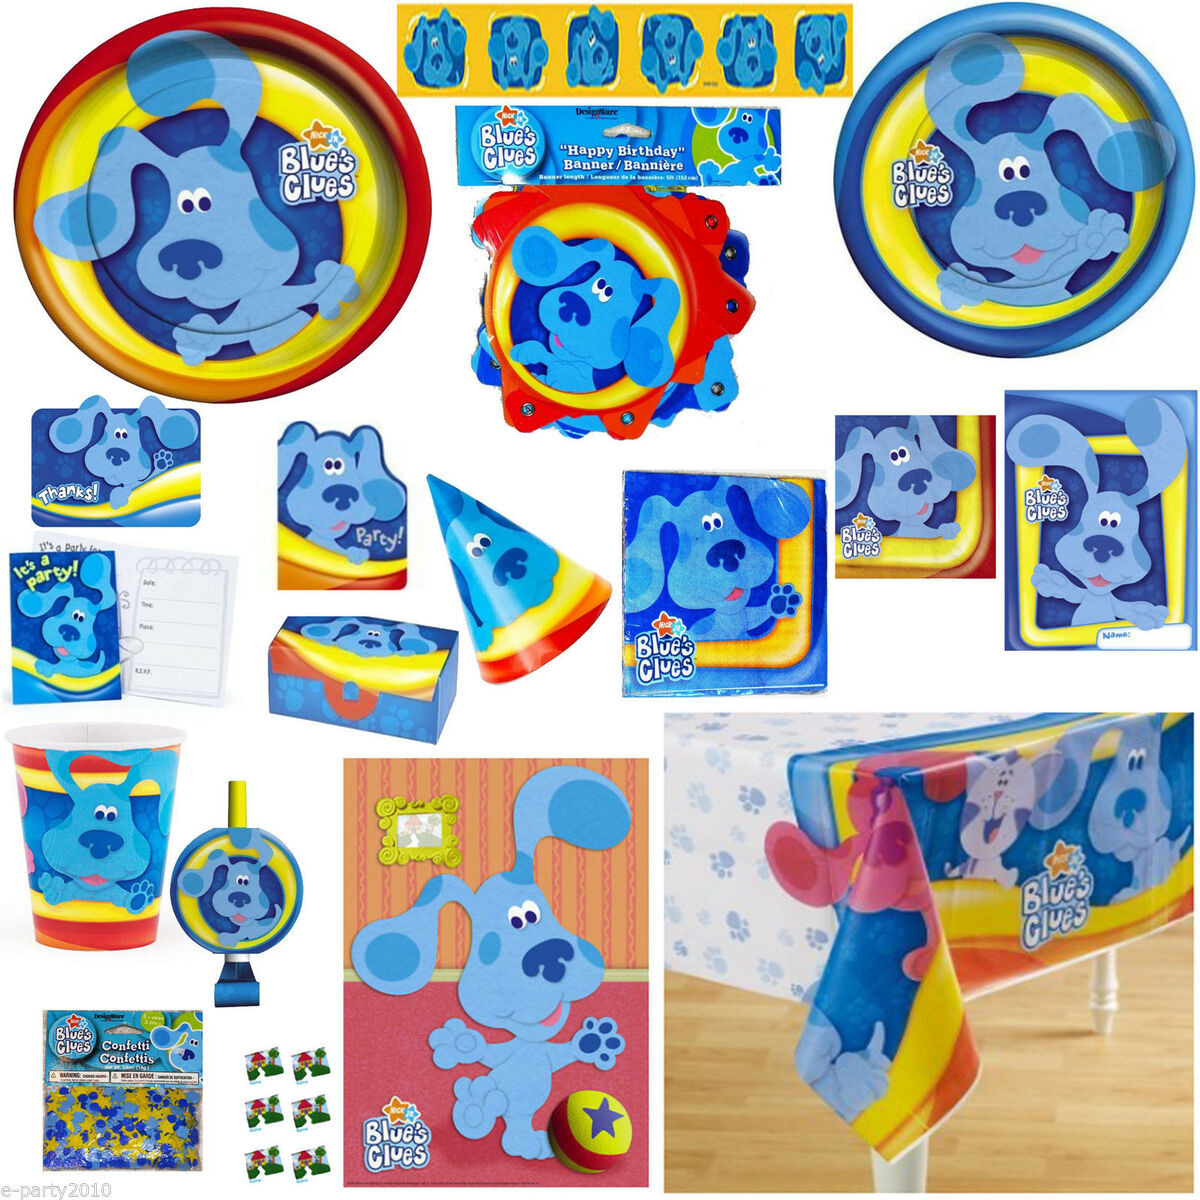 Blues Clues Birthday Party Supplies
 Vintage Blues Clues Birthday Party Supplies Pick 1 or Many